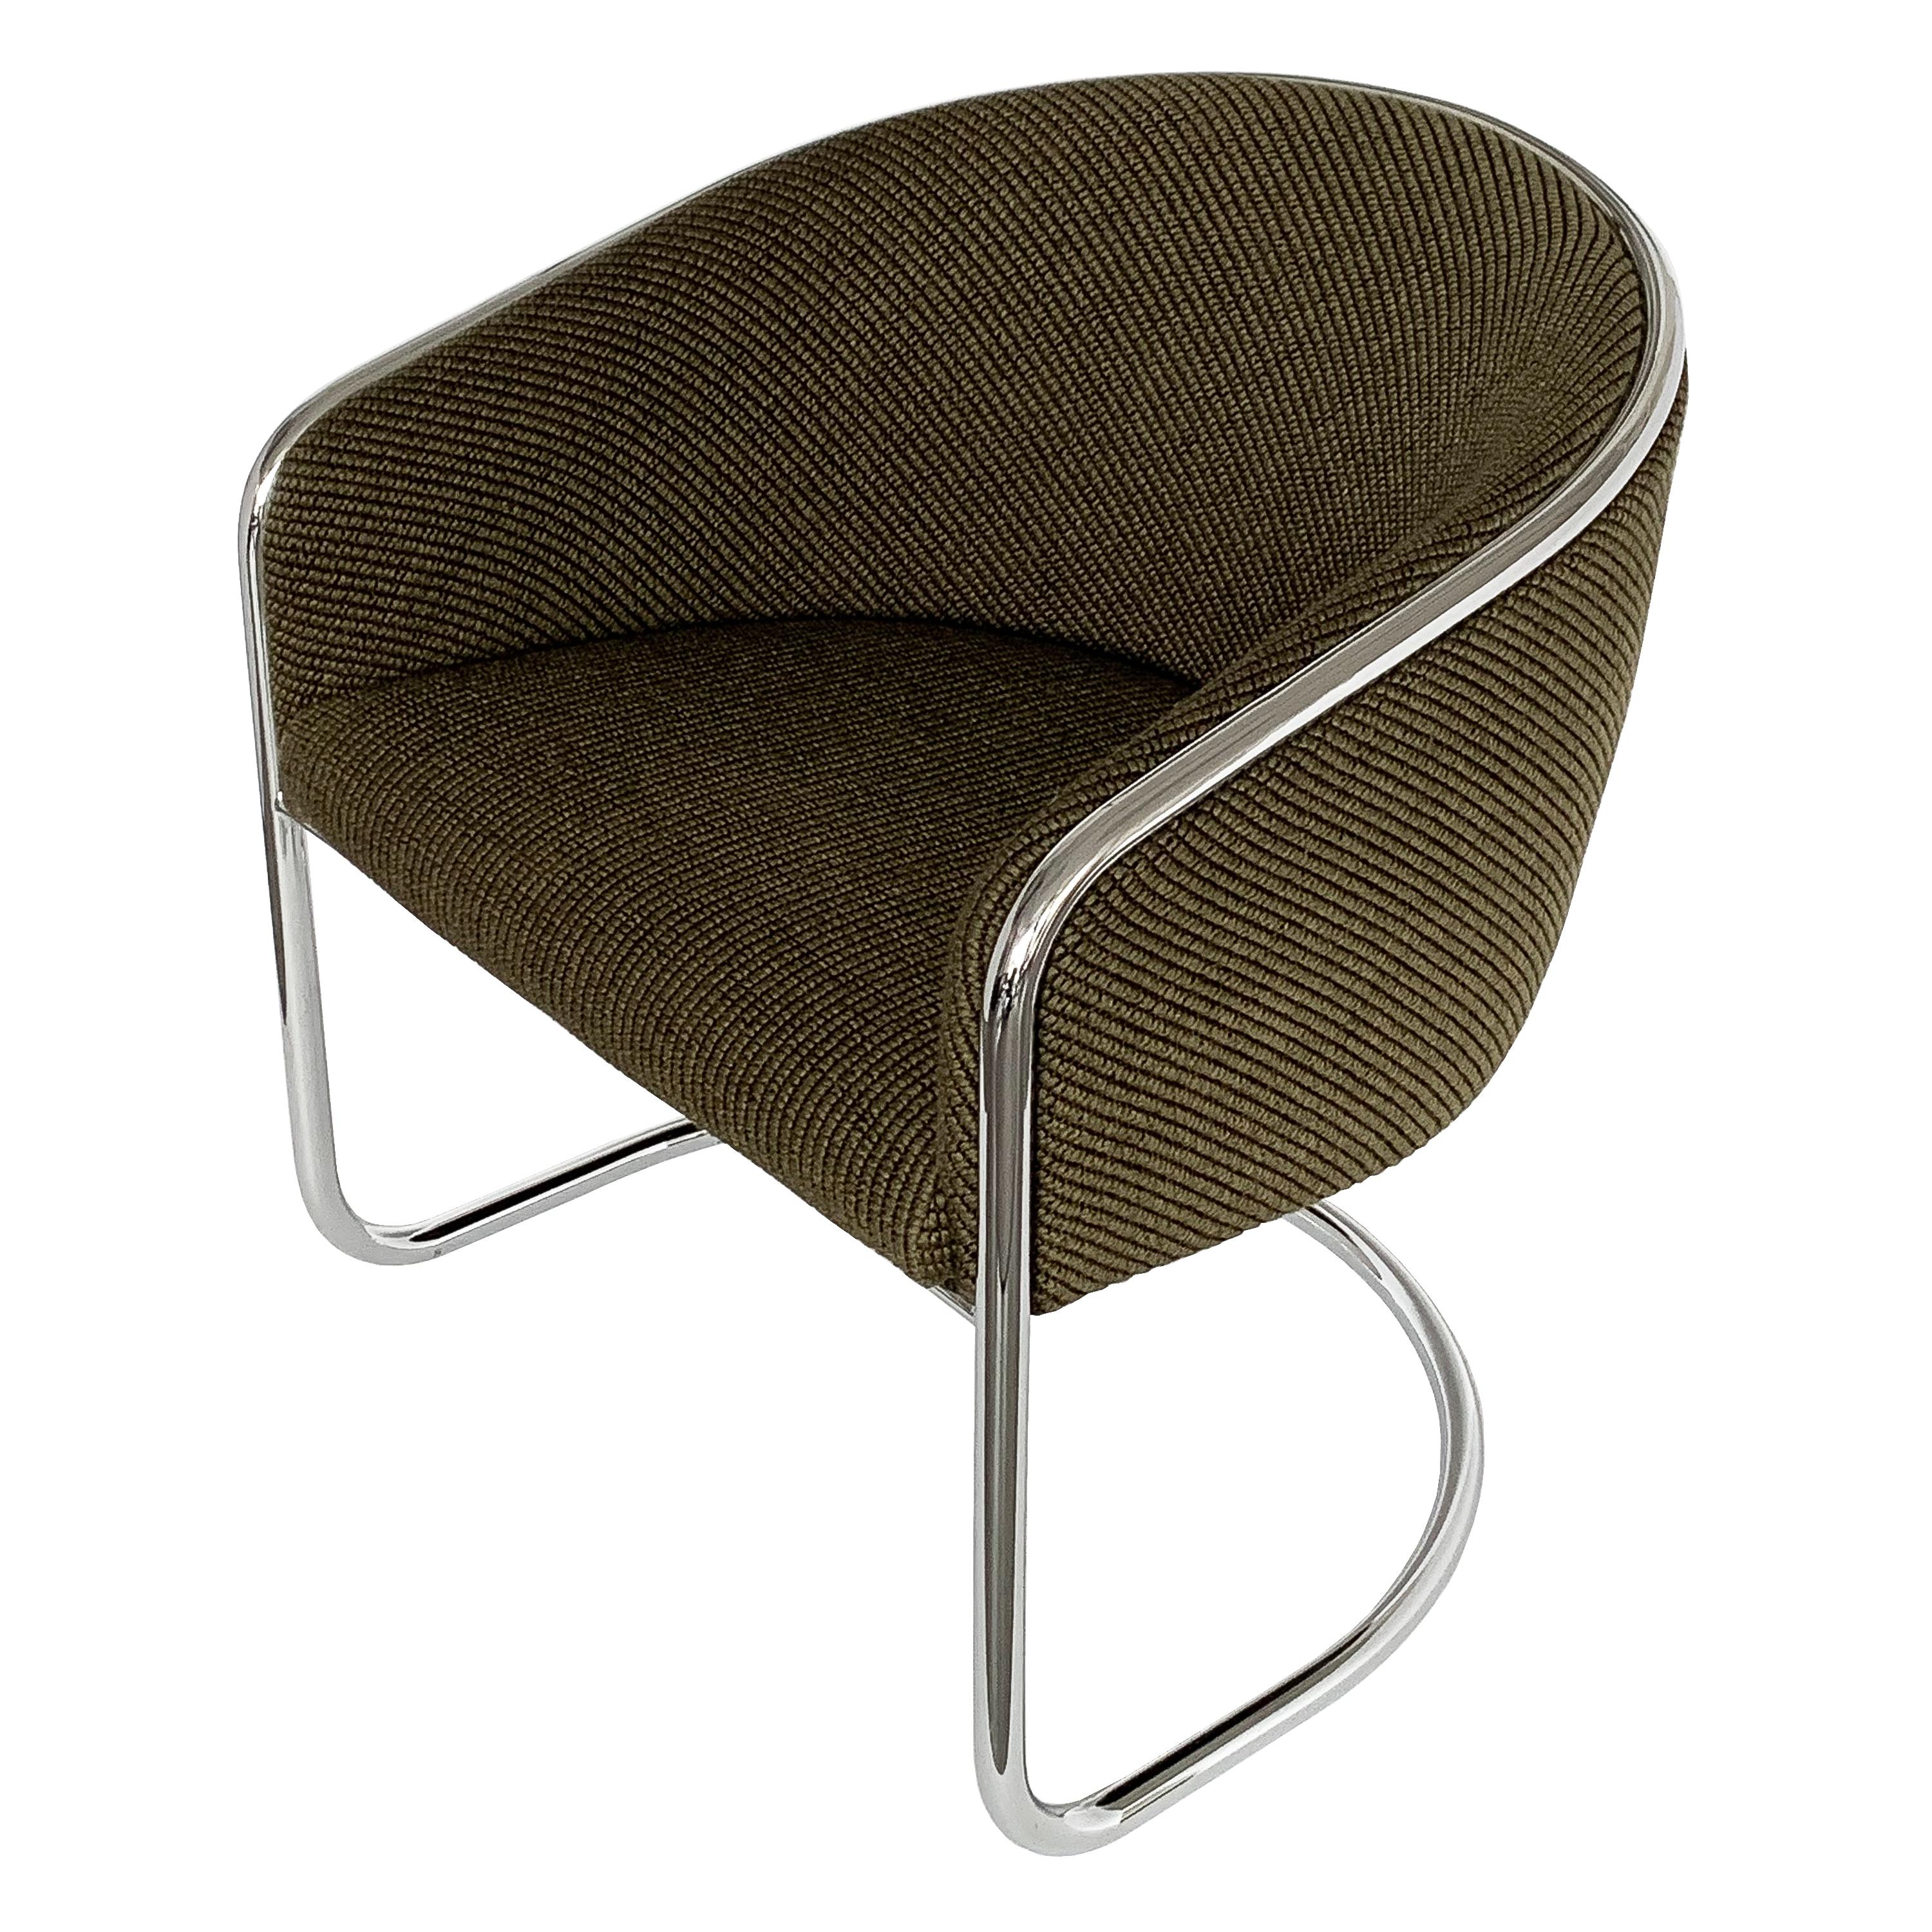 Set of 8 tub / club cantilever dining or lounge chairs by Joan Burgasser / Anton Lorenz for Thonet, circa 1970s. Chrome-plated tubular steel frames. Original moss / army green textured upholstery is in excellent condition. The ribbed woven fabric is